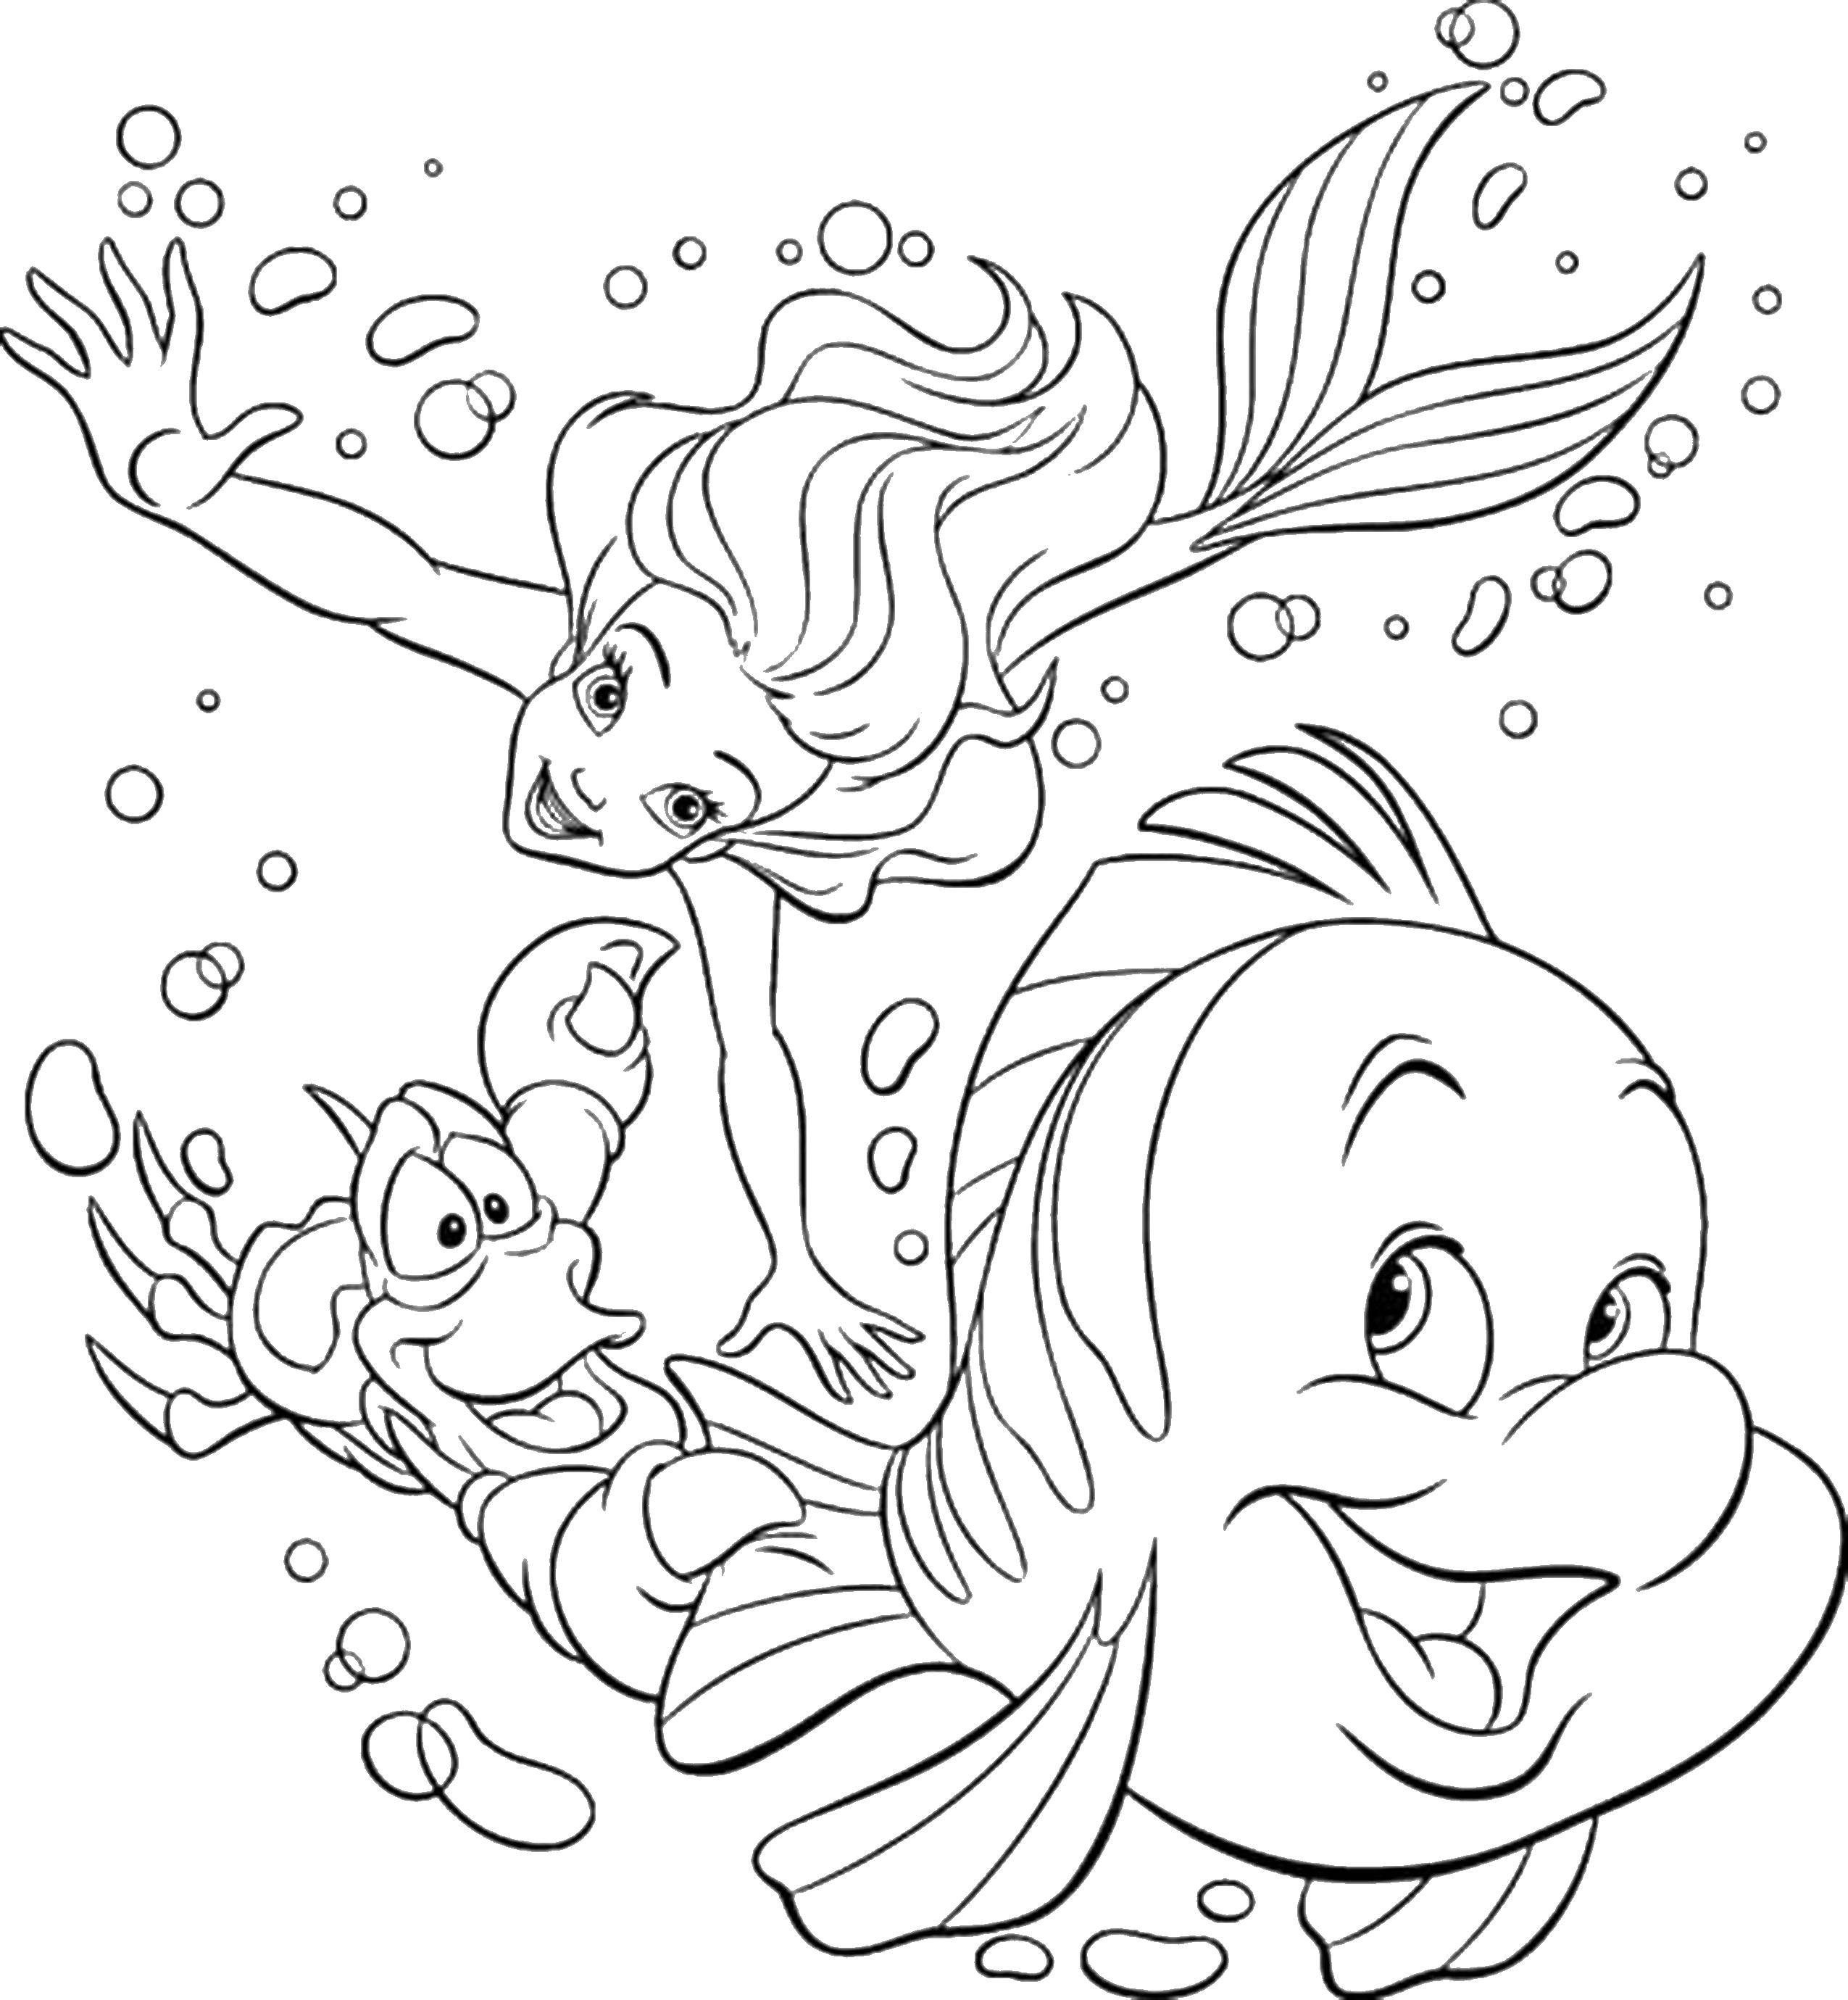 Coloring Ariel having fun with friends. Category Disney coloring pages. Tags:  Disney, the little mermaid, Ariel.